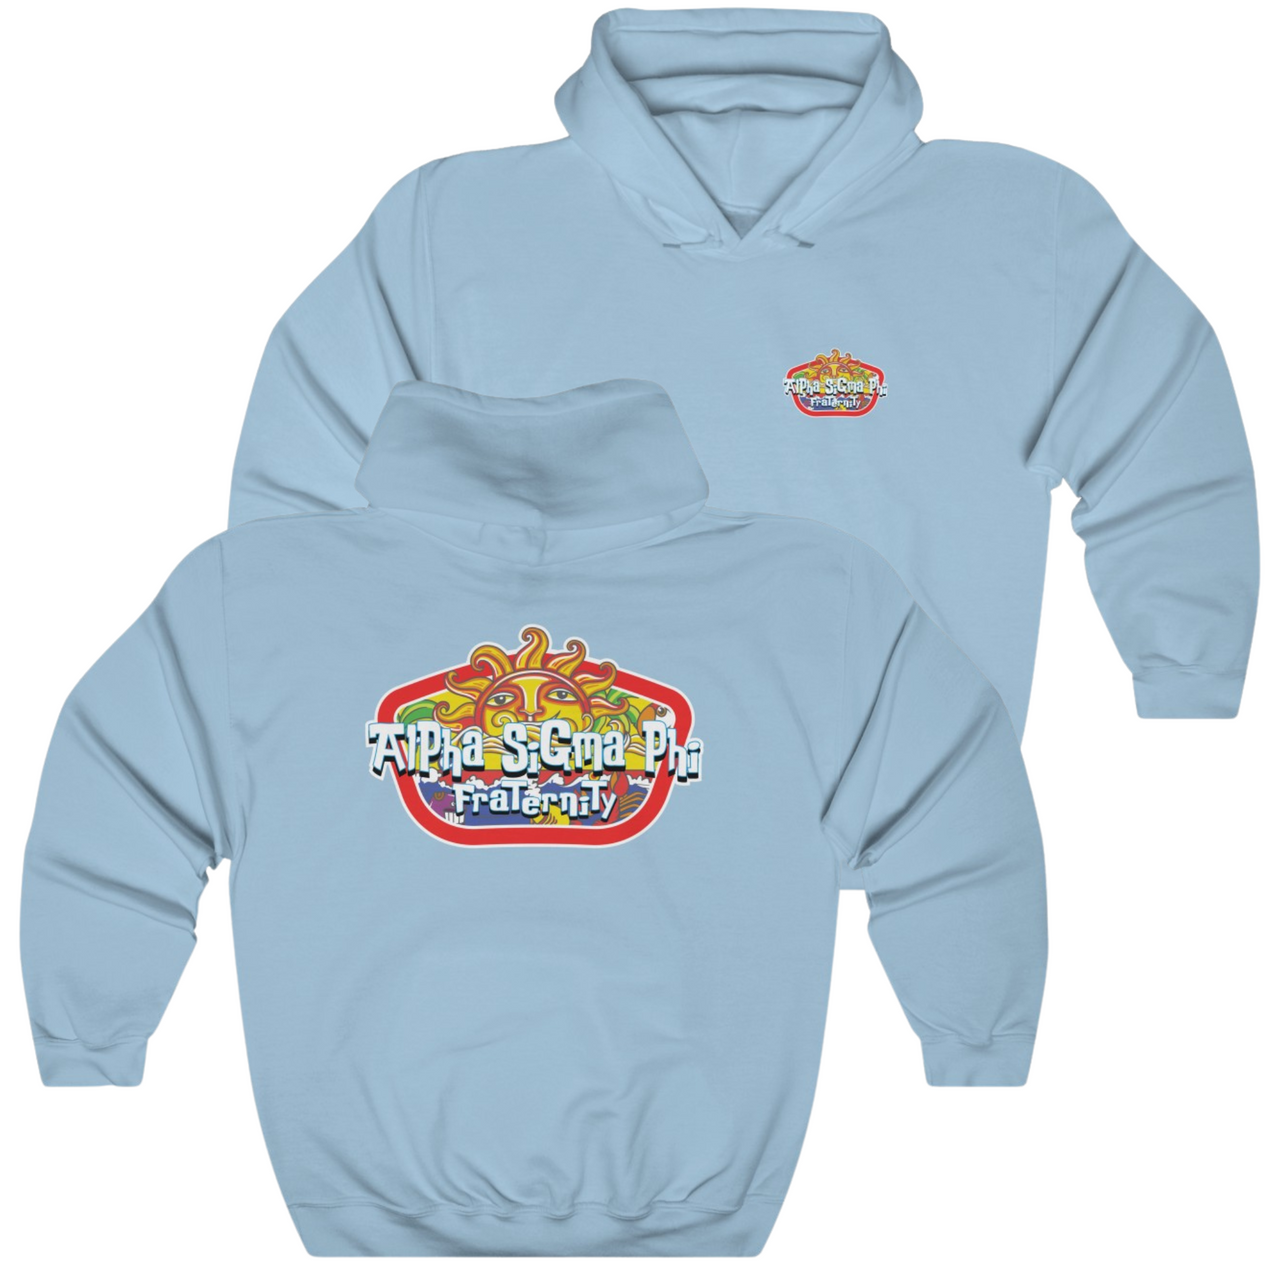 Light Blue Alpha Sigma Phi Graphic Hoodie | Summer Sol | Alpha Sigma Phi Fraternity Clothing